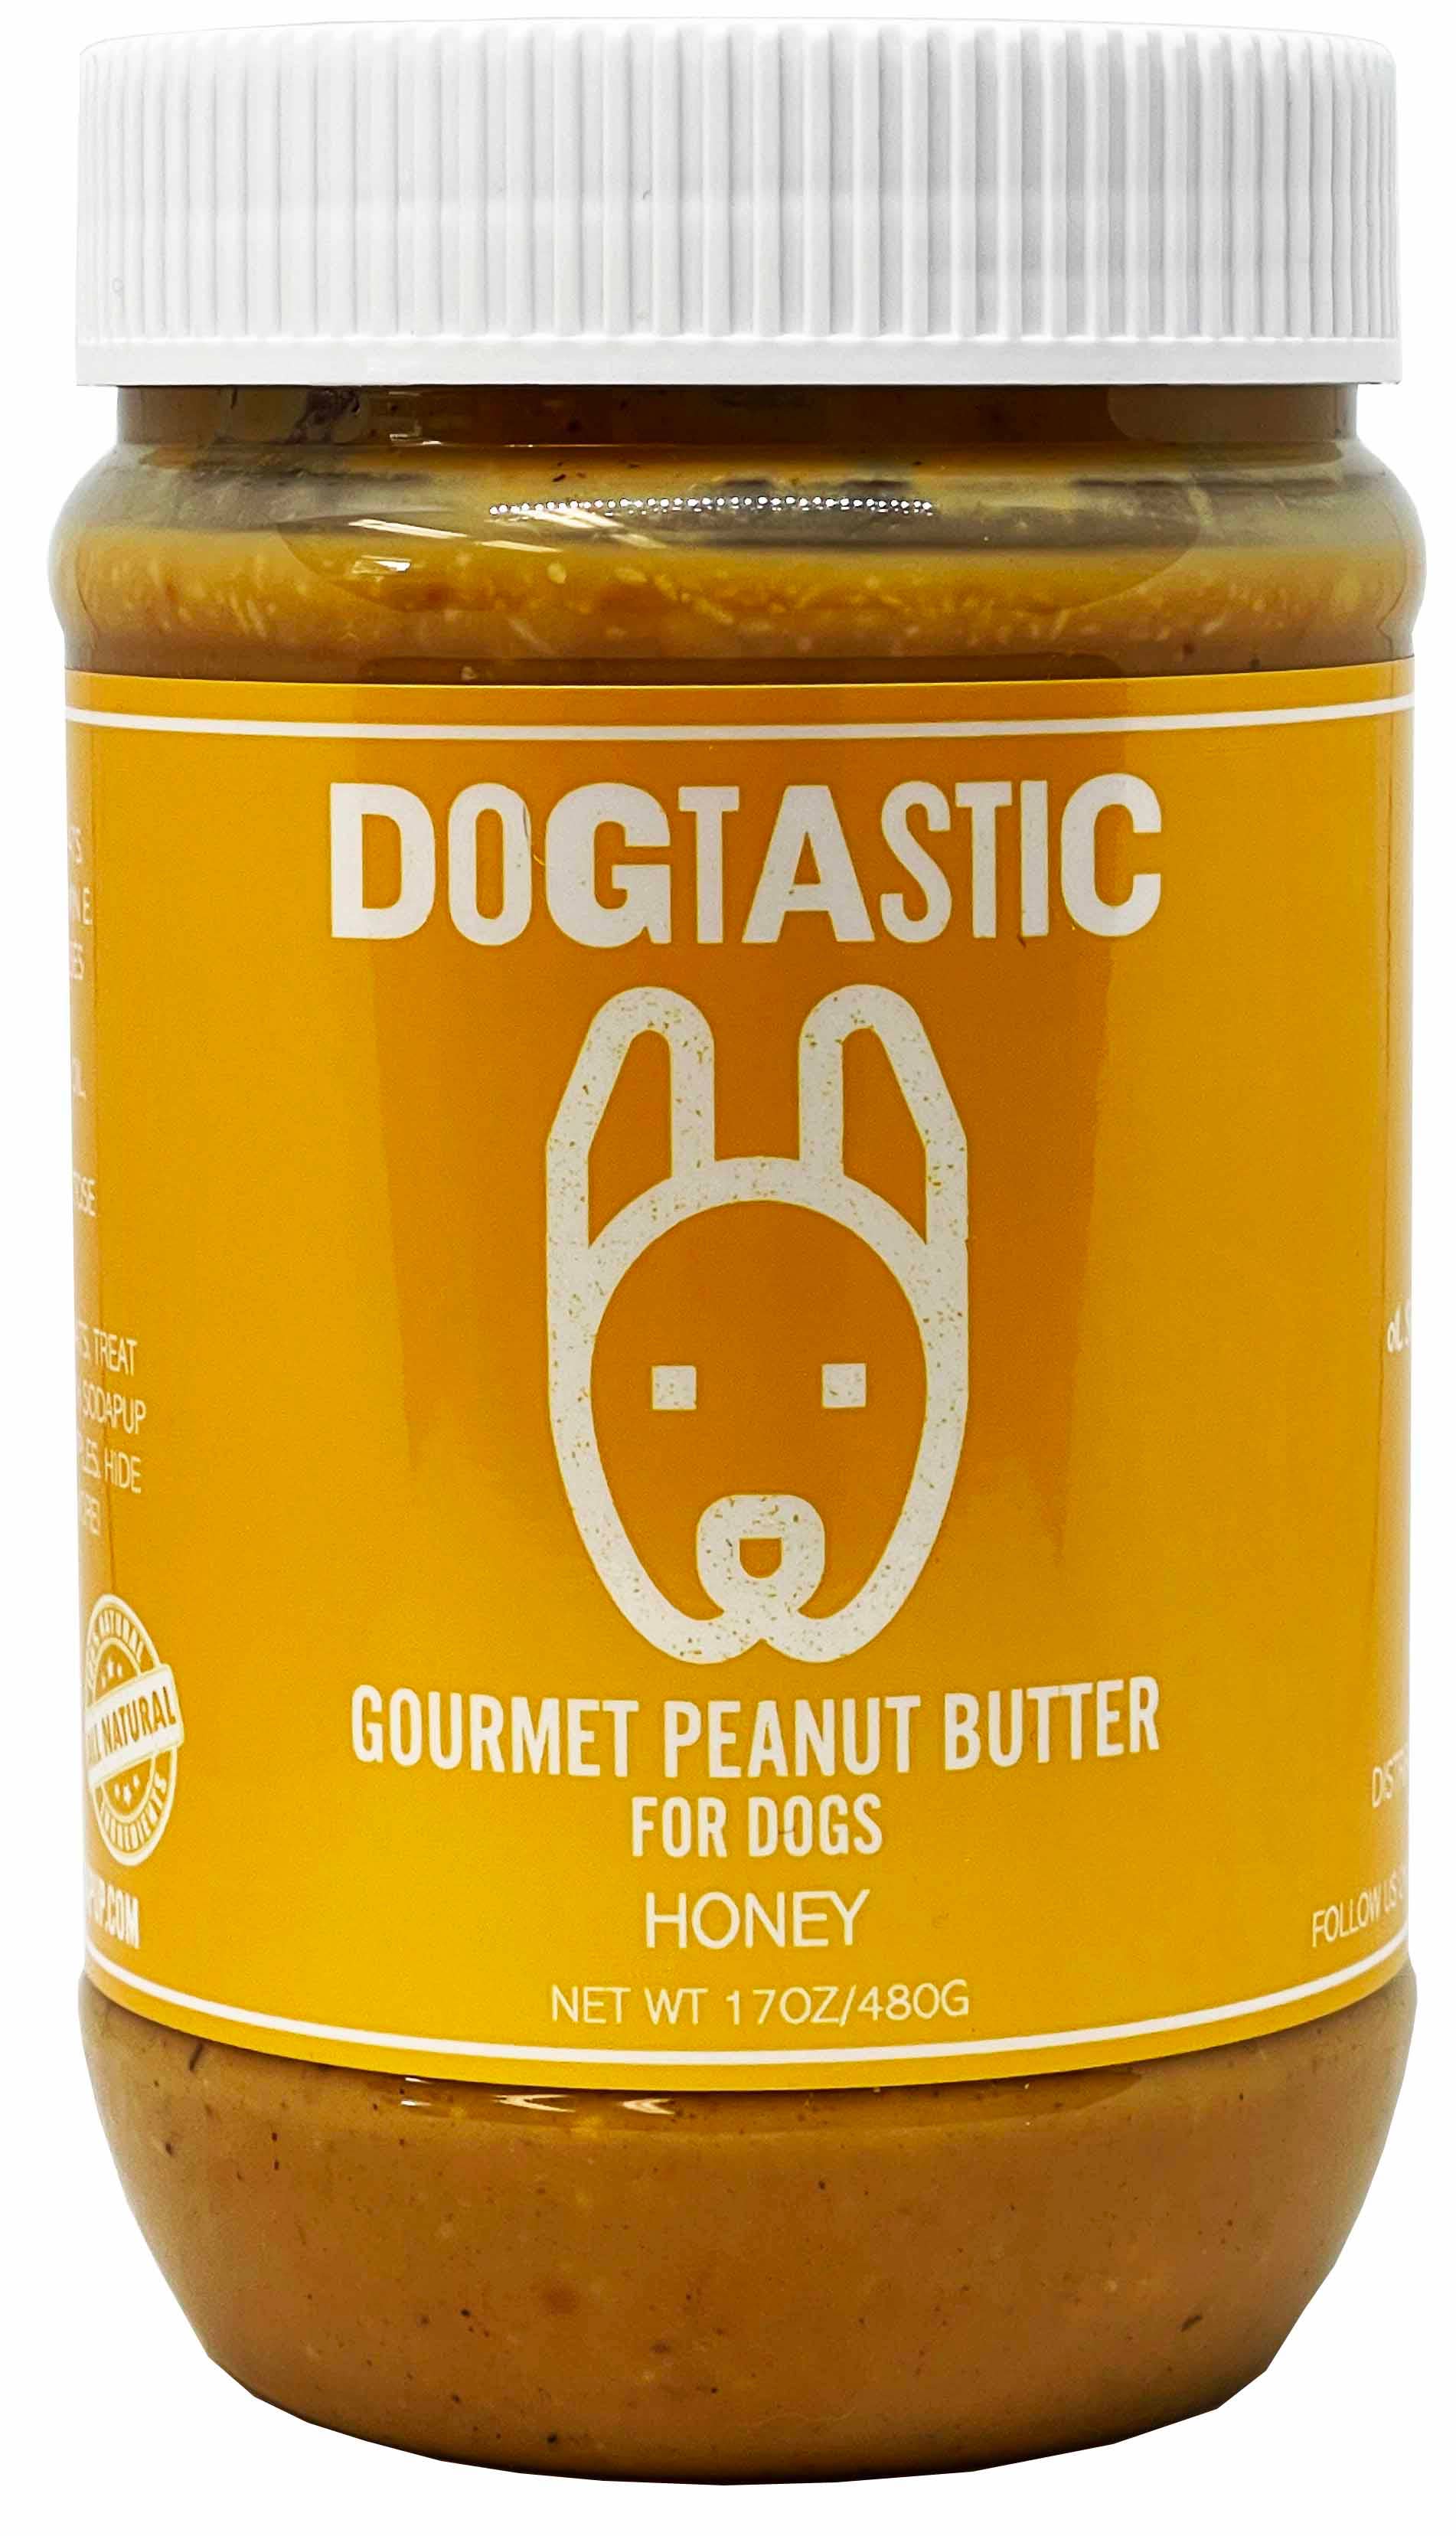 SodaPup - Dogtastic Gourmet Peanut Butter for Dogs - Honey Flavor